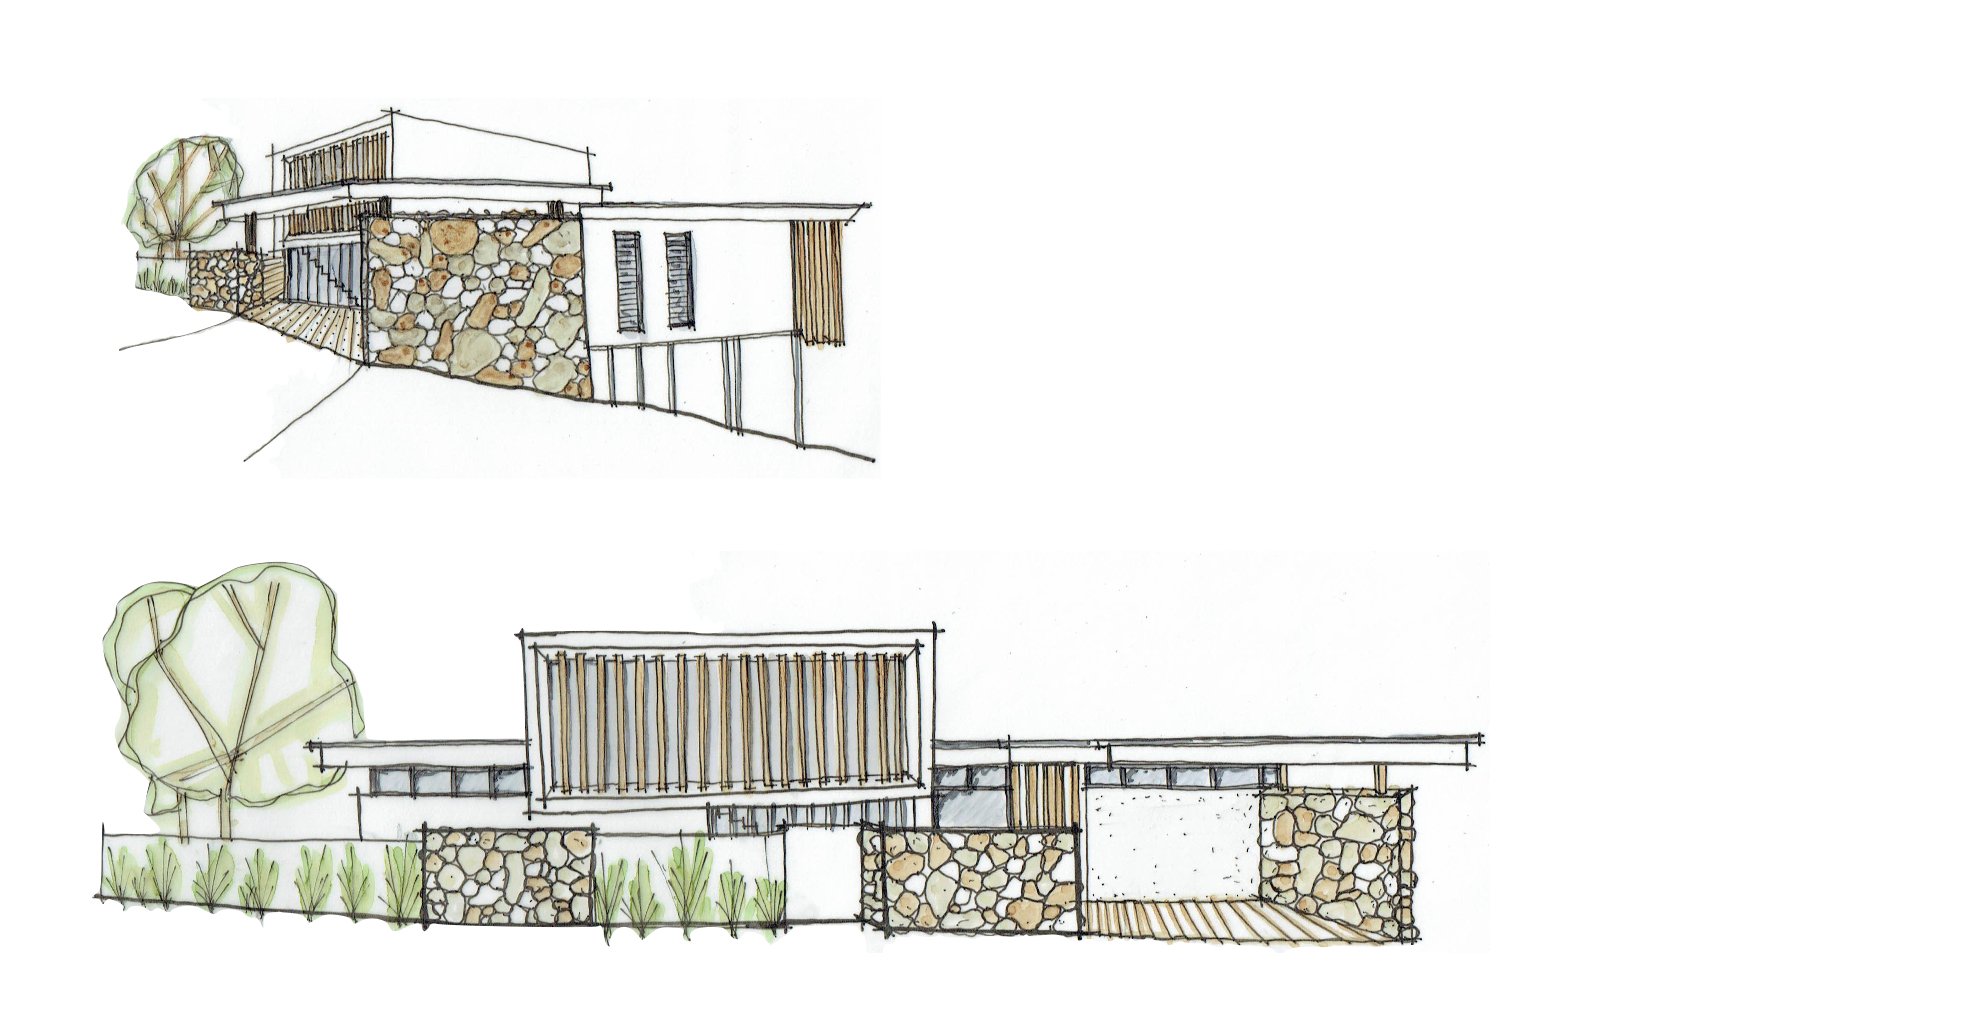 mdesign is a building design practice that operates on the Sunshine Coast